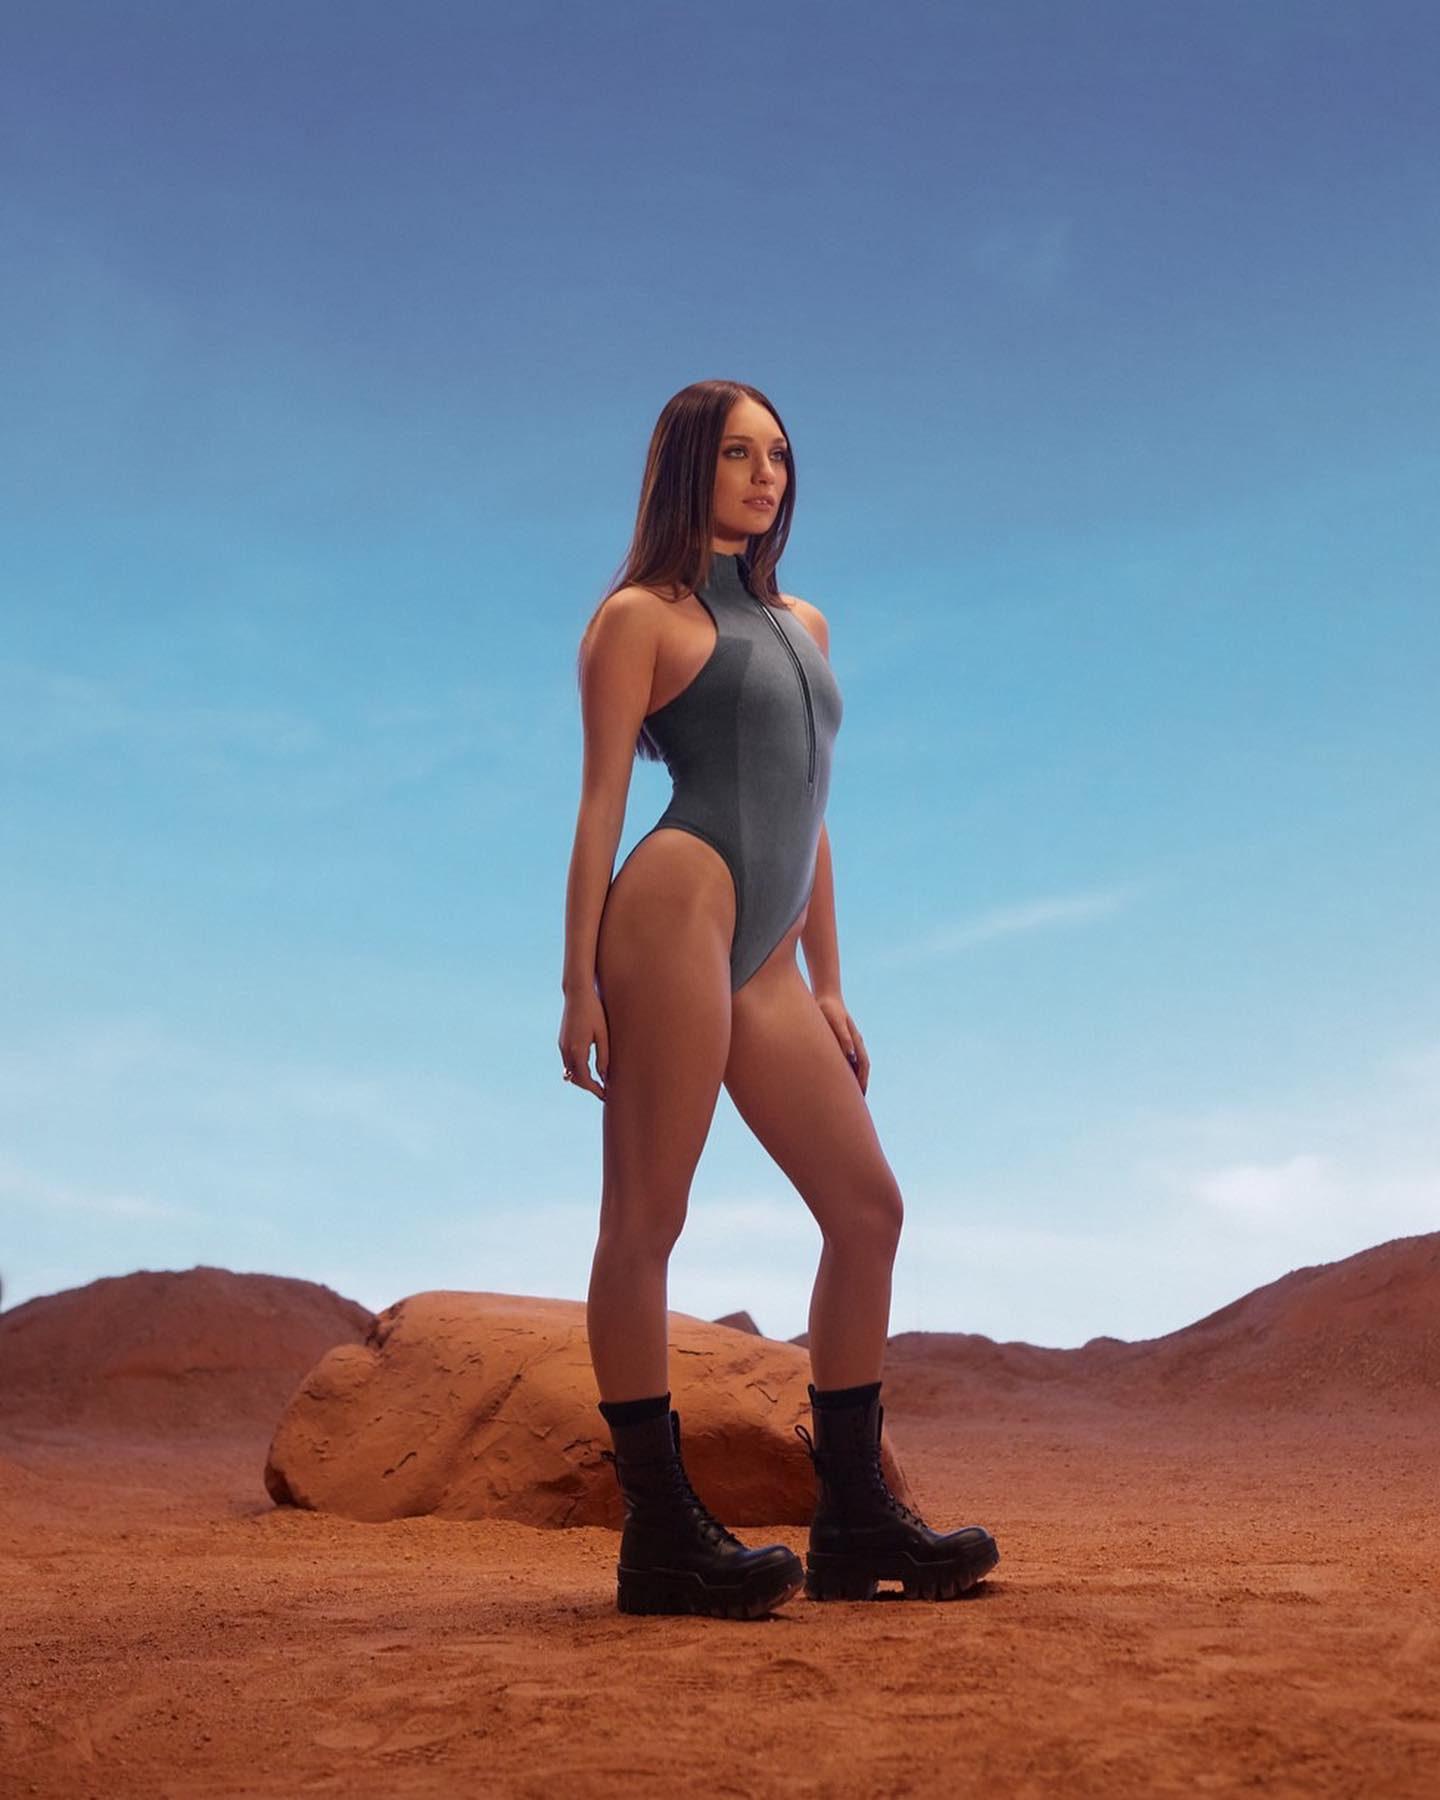 Maddie Ziegler Goes to The Desert With New Fabletics Line! - Photo 8